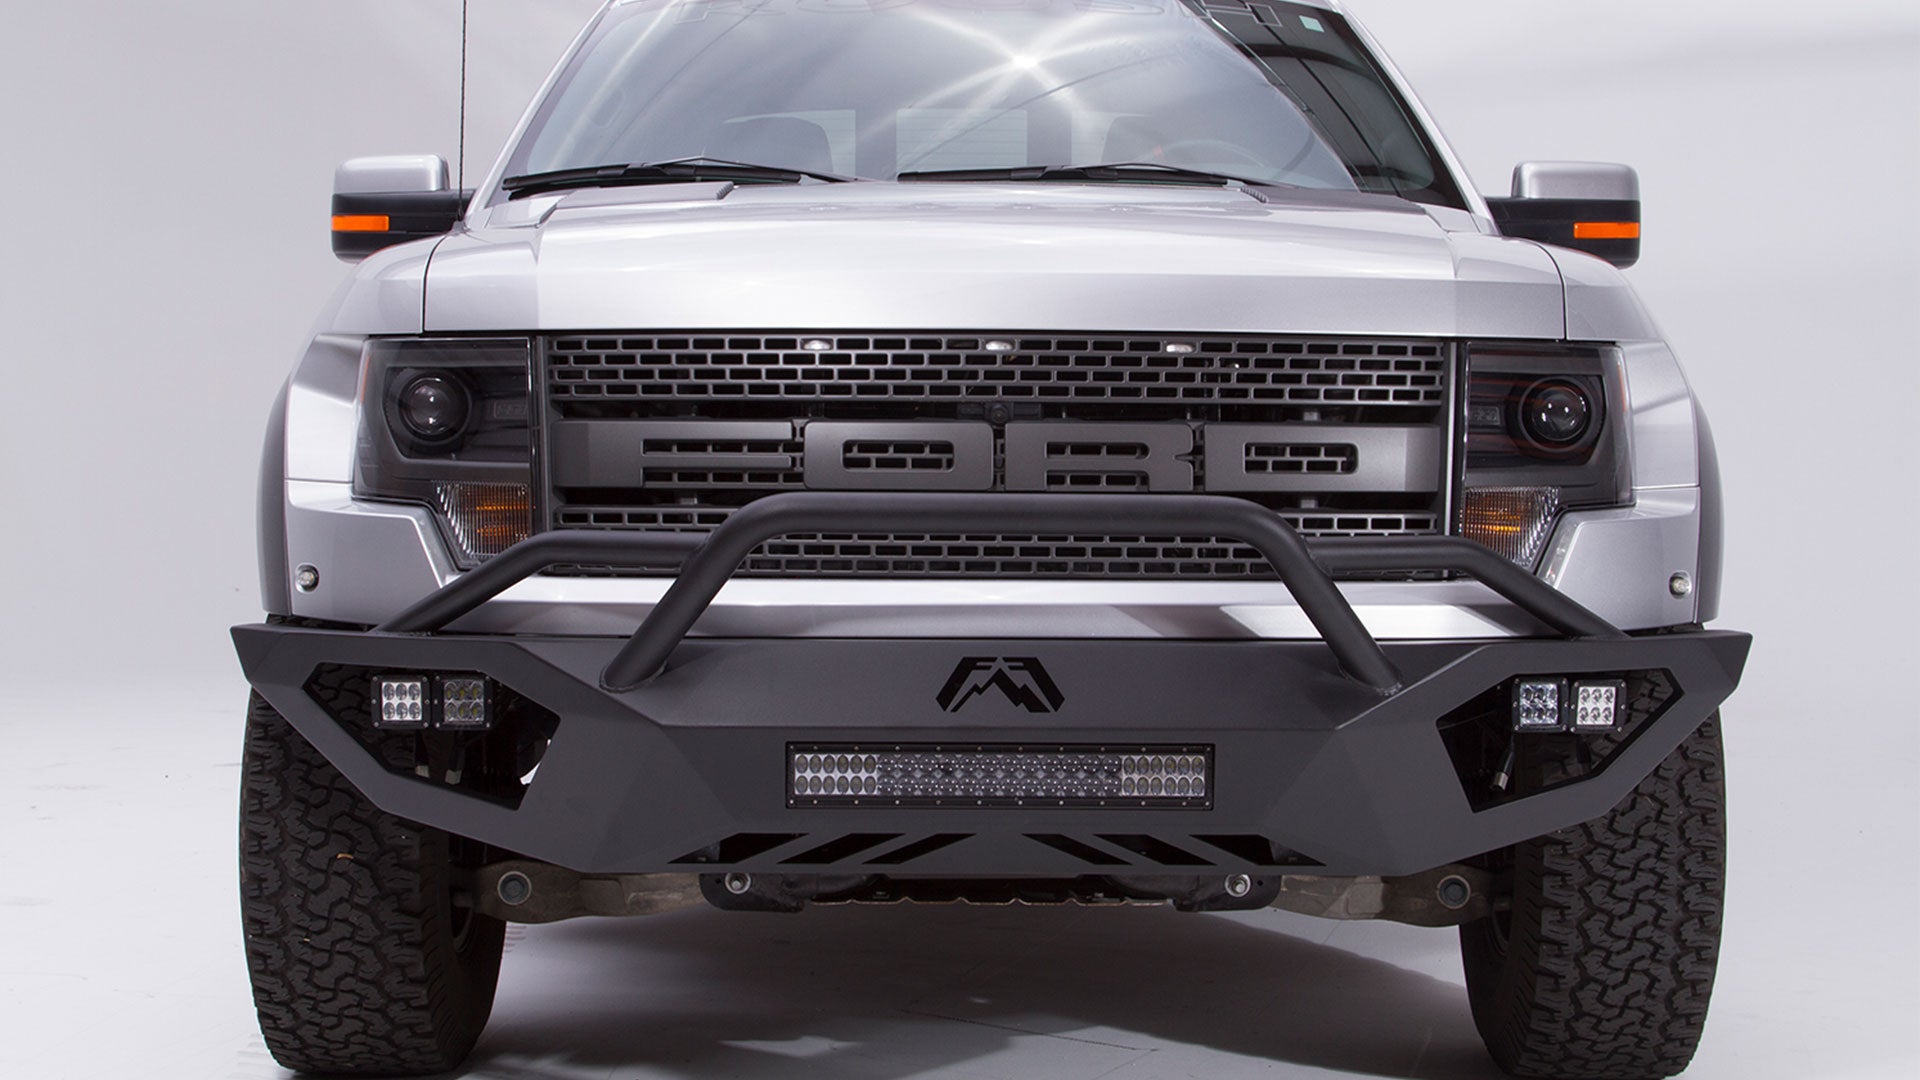 Fab Four Vengeance Front Bumper Ford F150 Raptor 2017-2020 - Mid-Atlantic Off-Roading